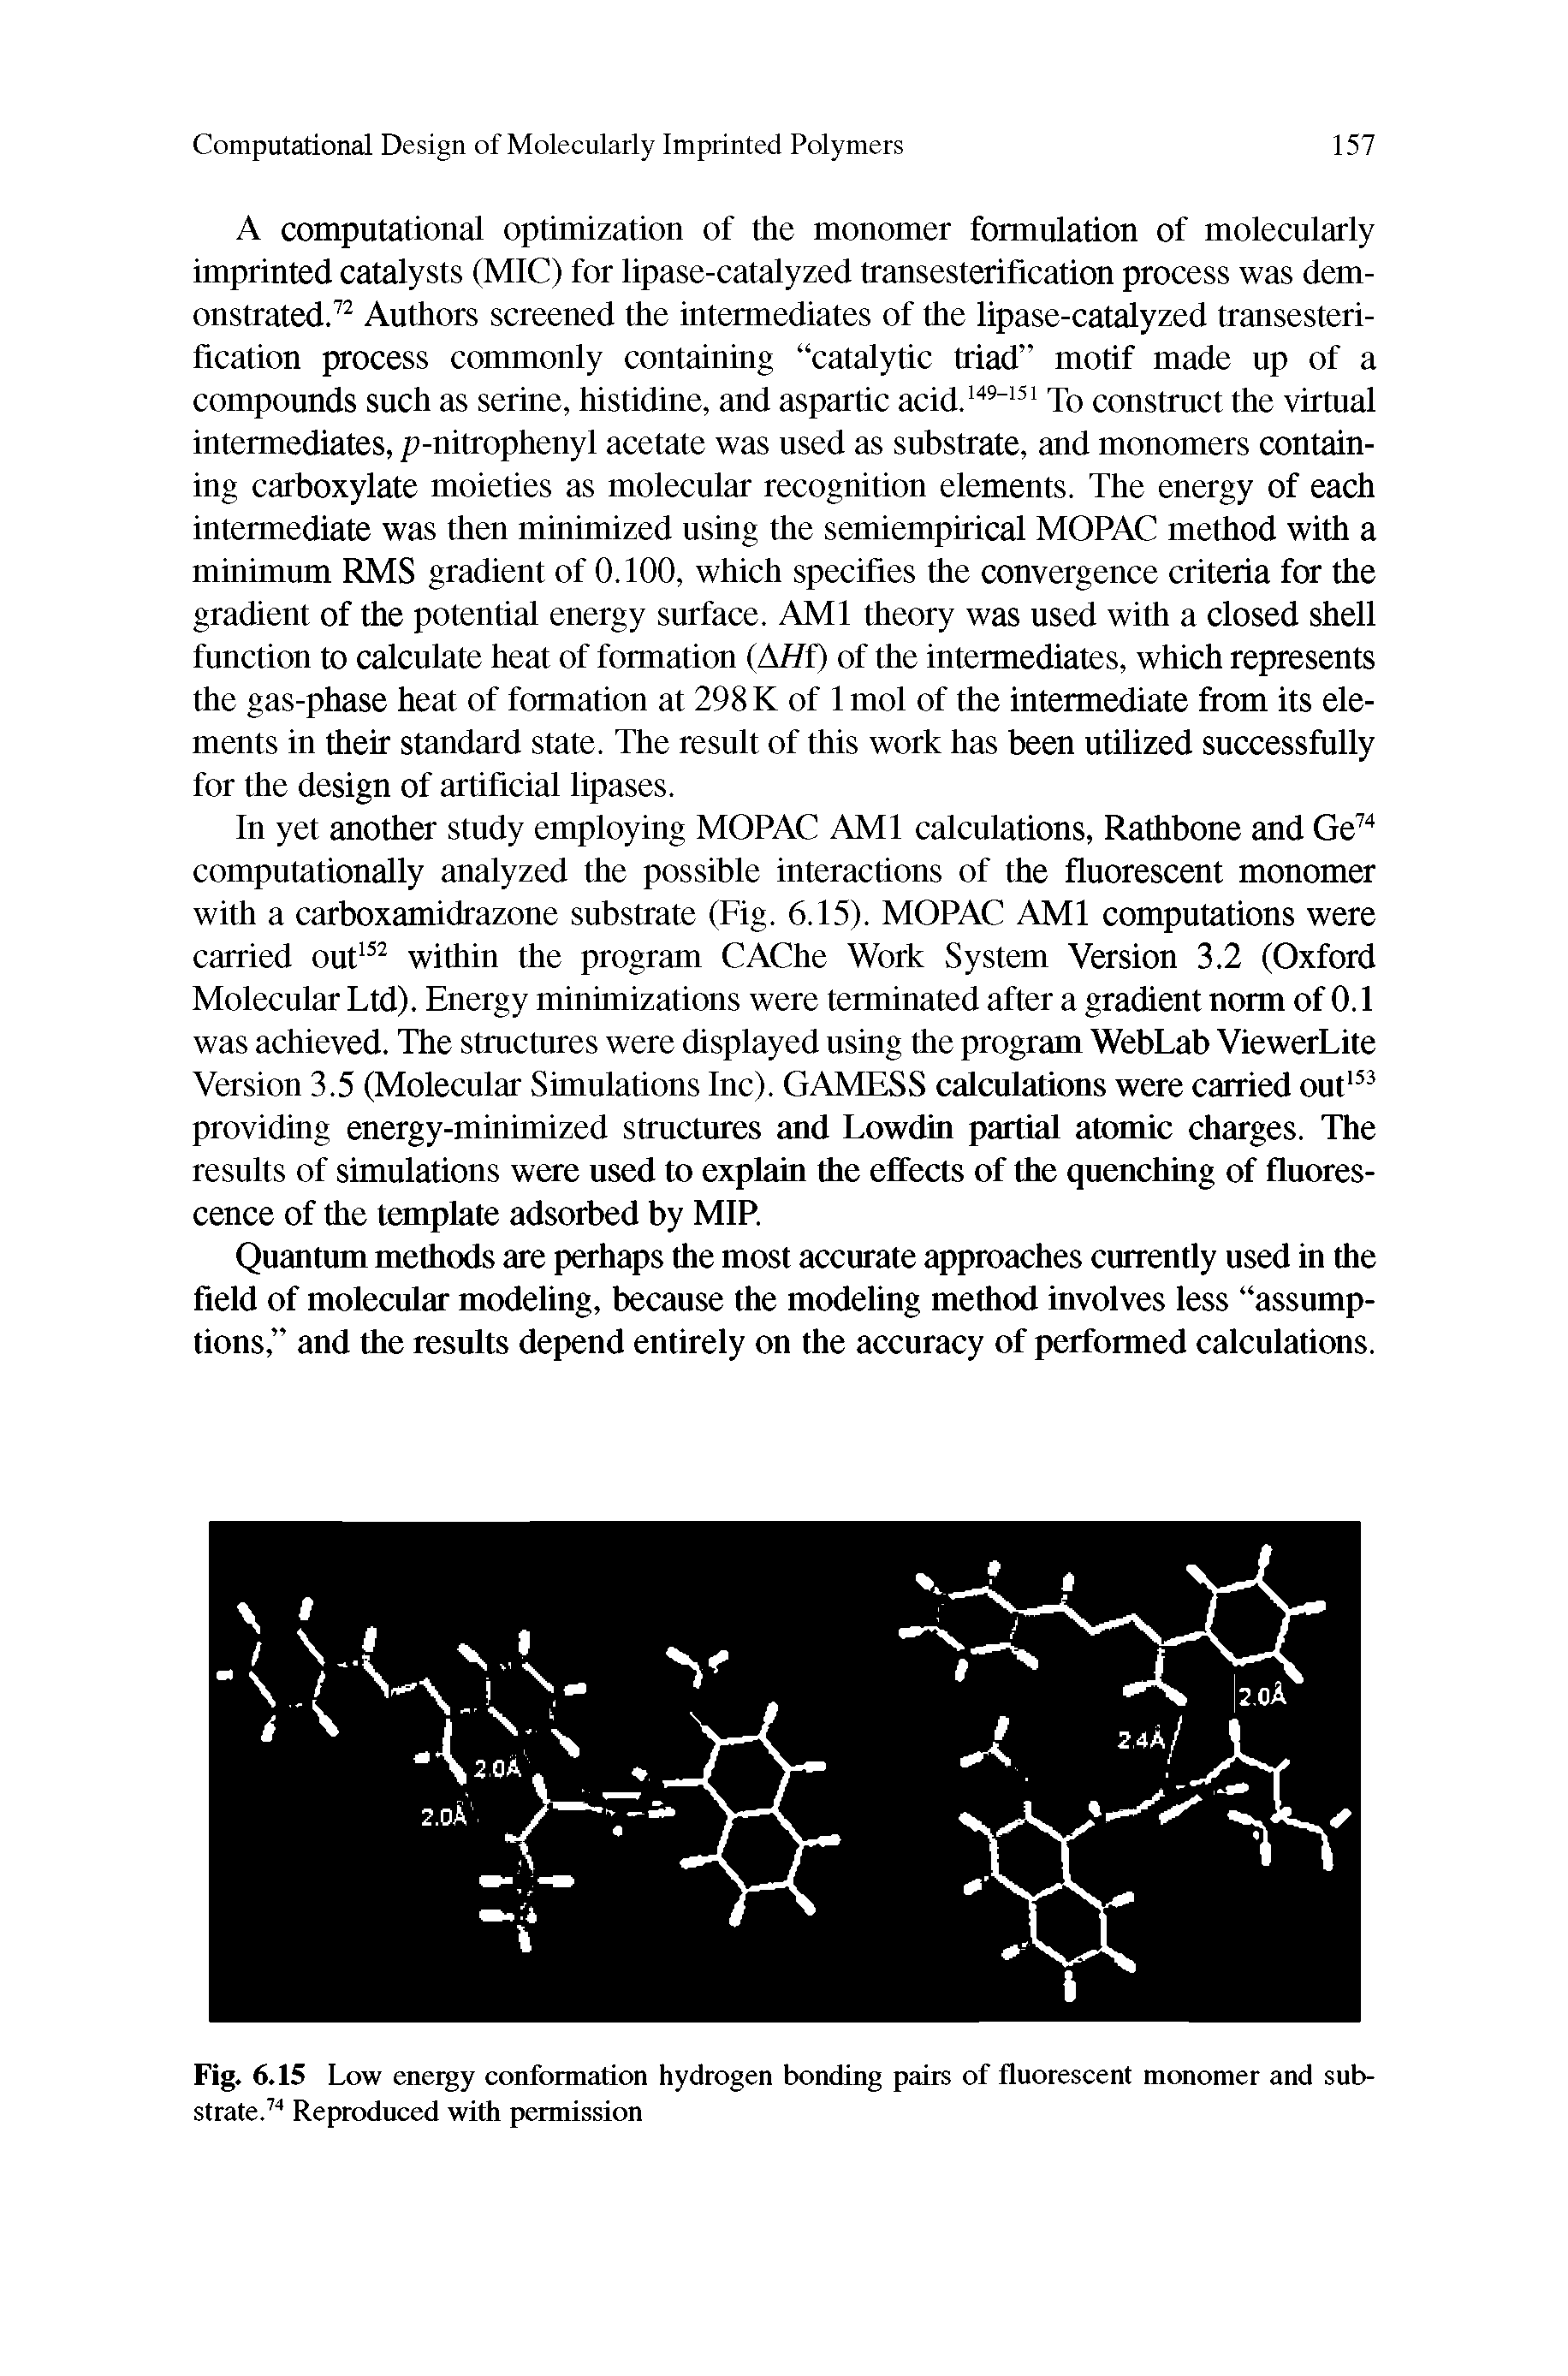 Fig. 6.15 Low energy conformation hydrogen bonding pairs of fluorescent monomer and substrate.74 Reproduced with permission...